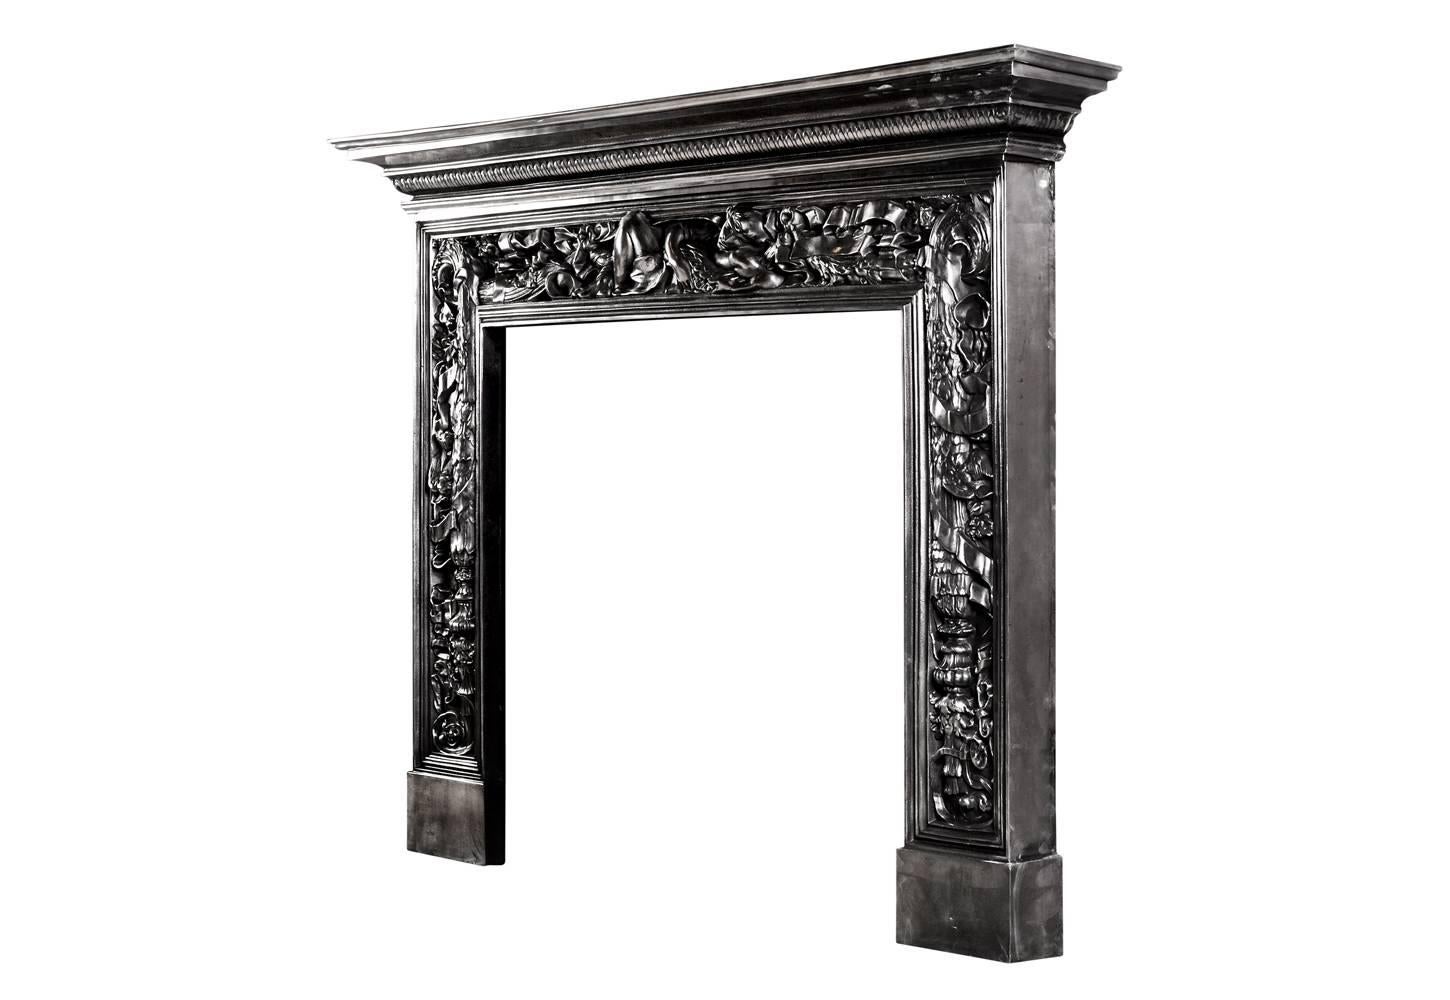 19th Century Ornate Cast Iron Fireplace Mantel with Reclining Classical Figure